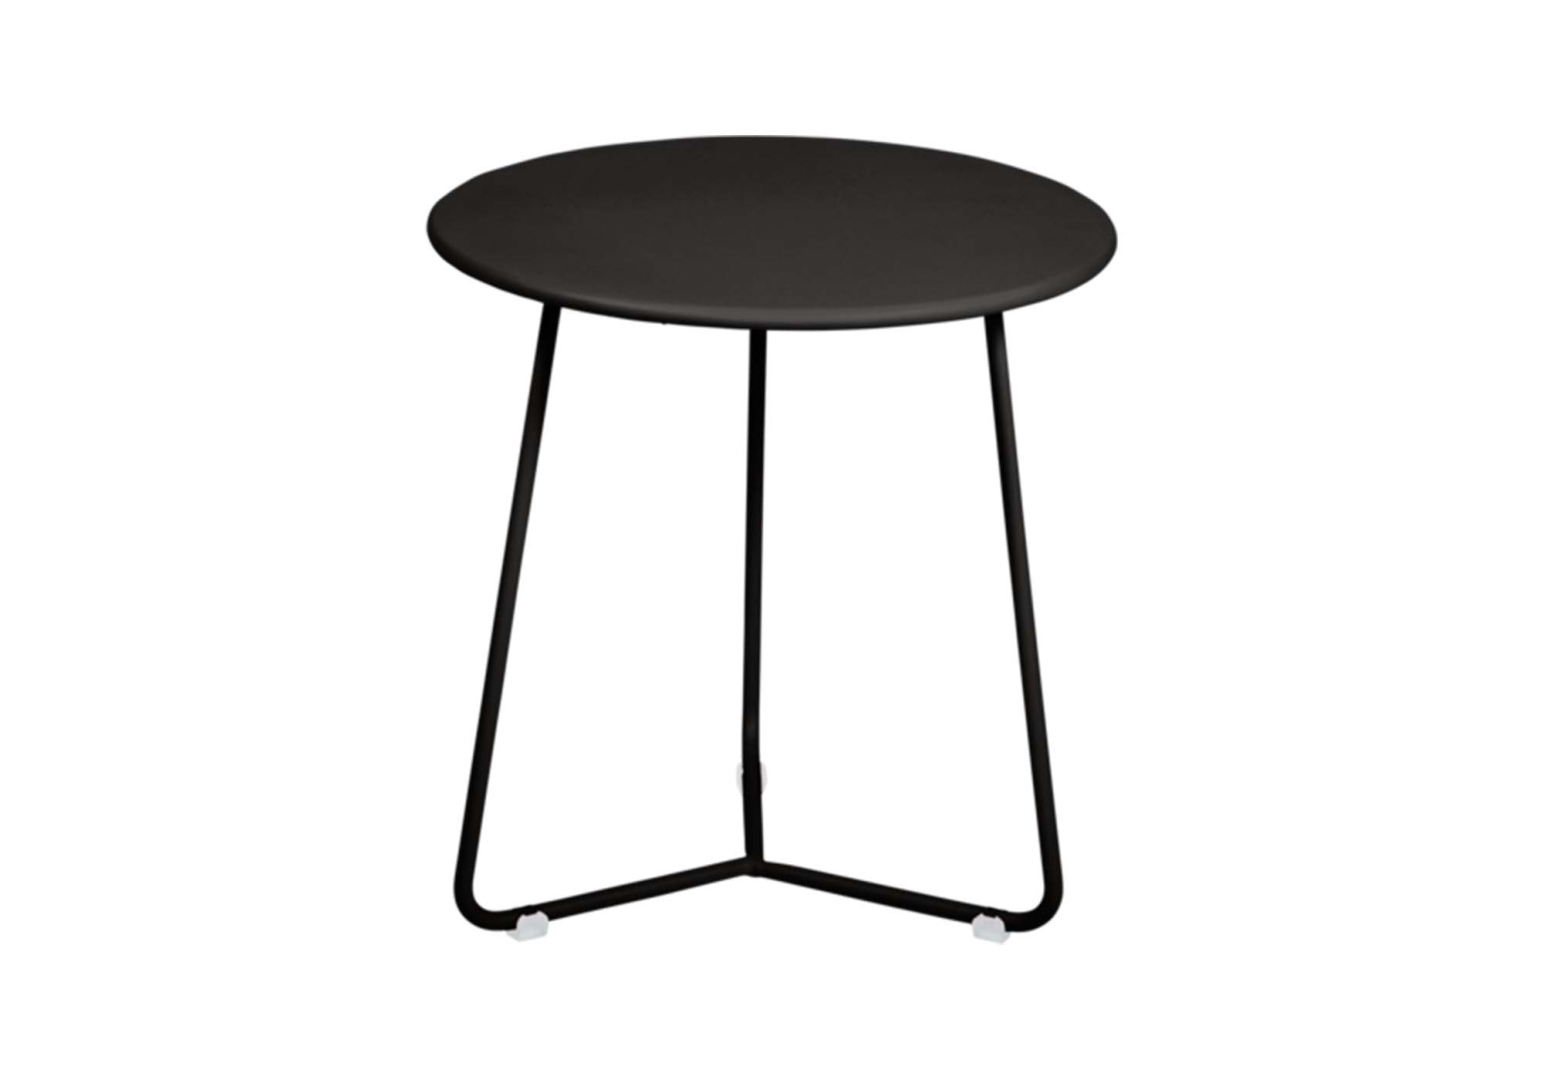 Table d'appoint Cocotte - FERMOB